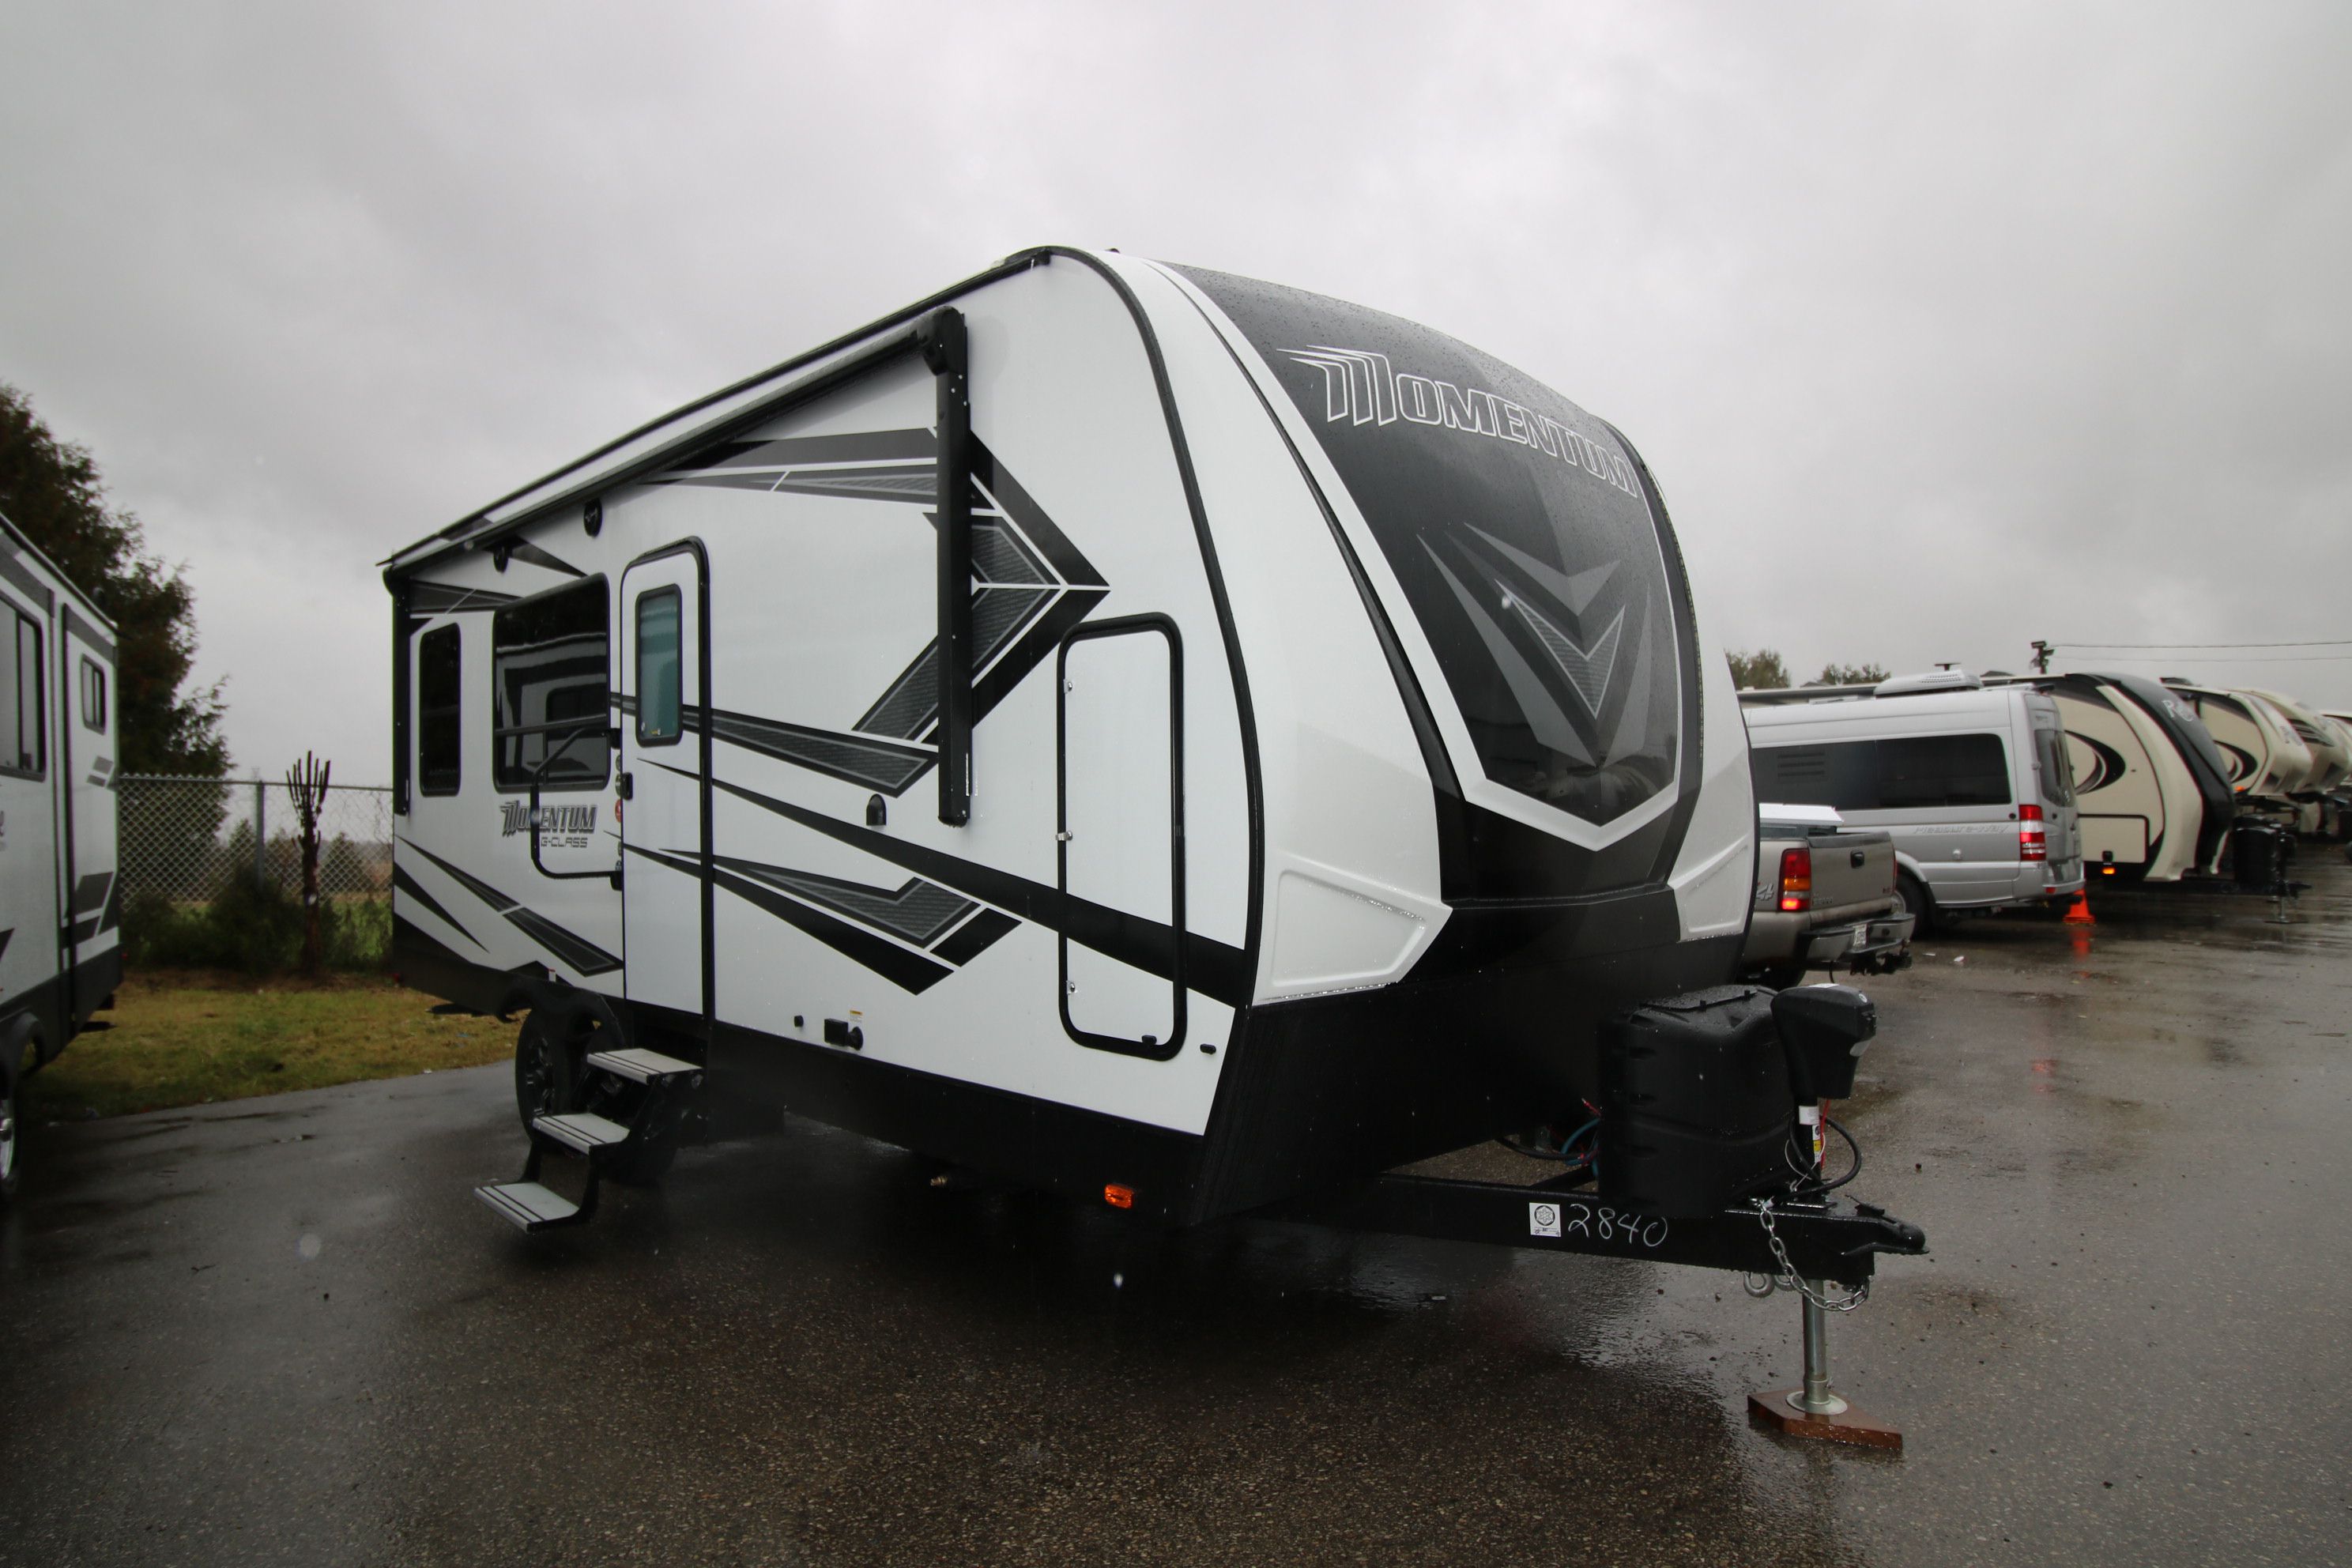 Momentum Toy Haulers - Airstreams | Campers | Can-Am RV ...